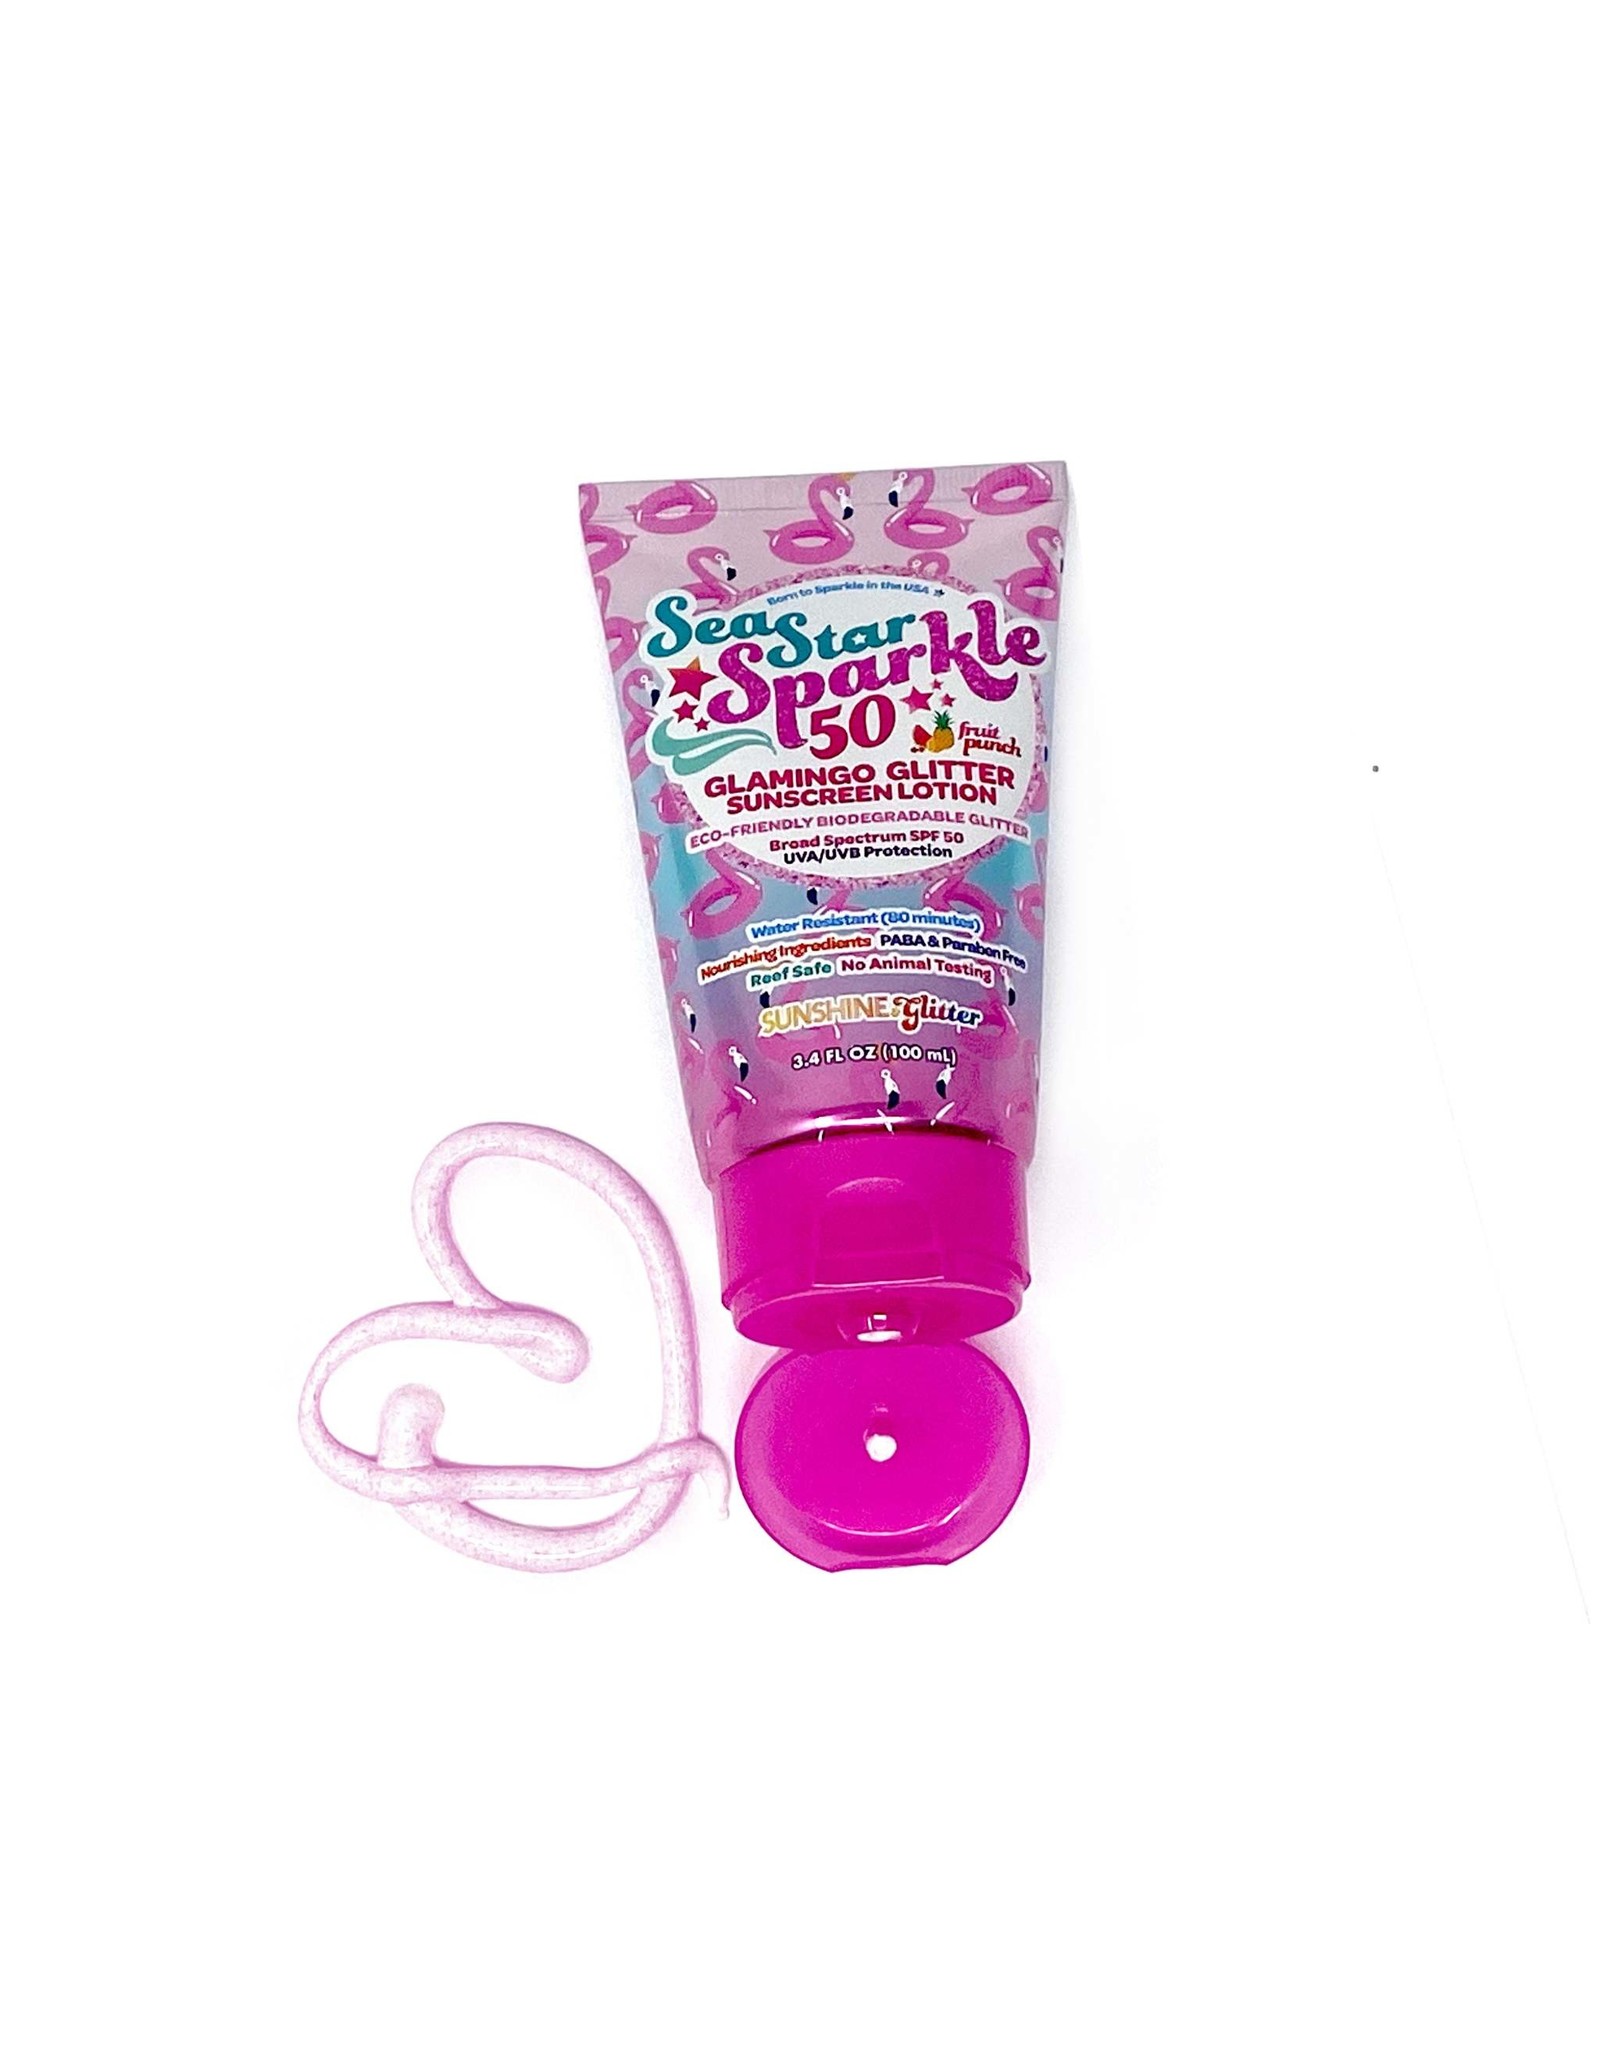 Pink Glamingo Glitter Sunscreen Lotion - Whimsy Toys